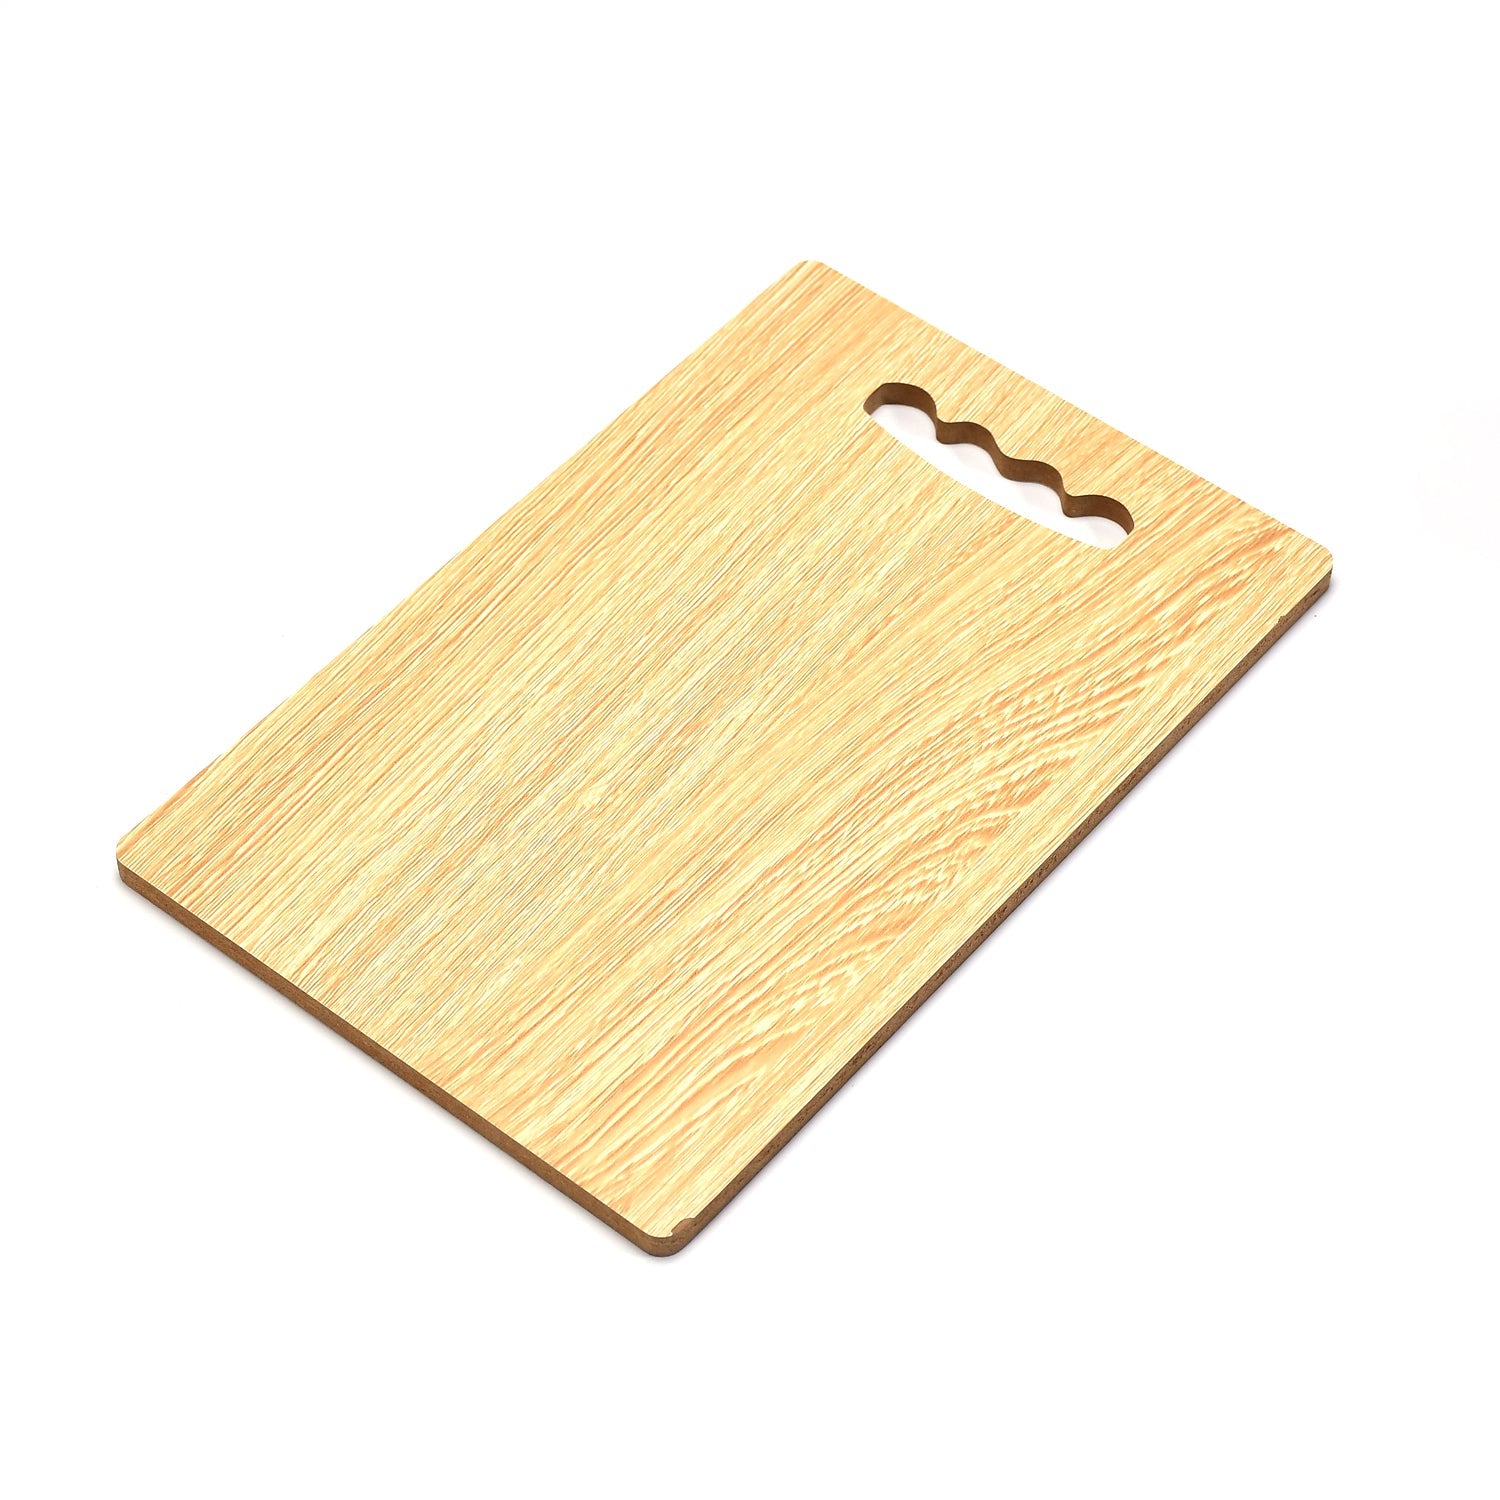 7122 Wooden Chopping Board For Vegetable Cutting & Kitchen Use DeoDap